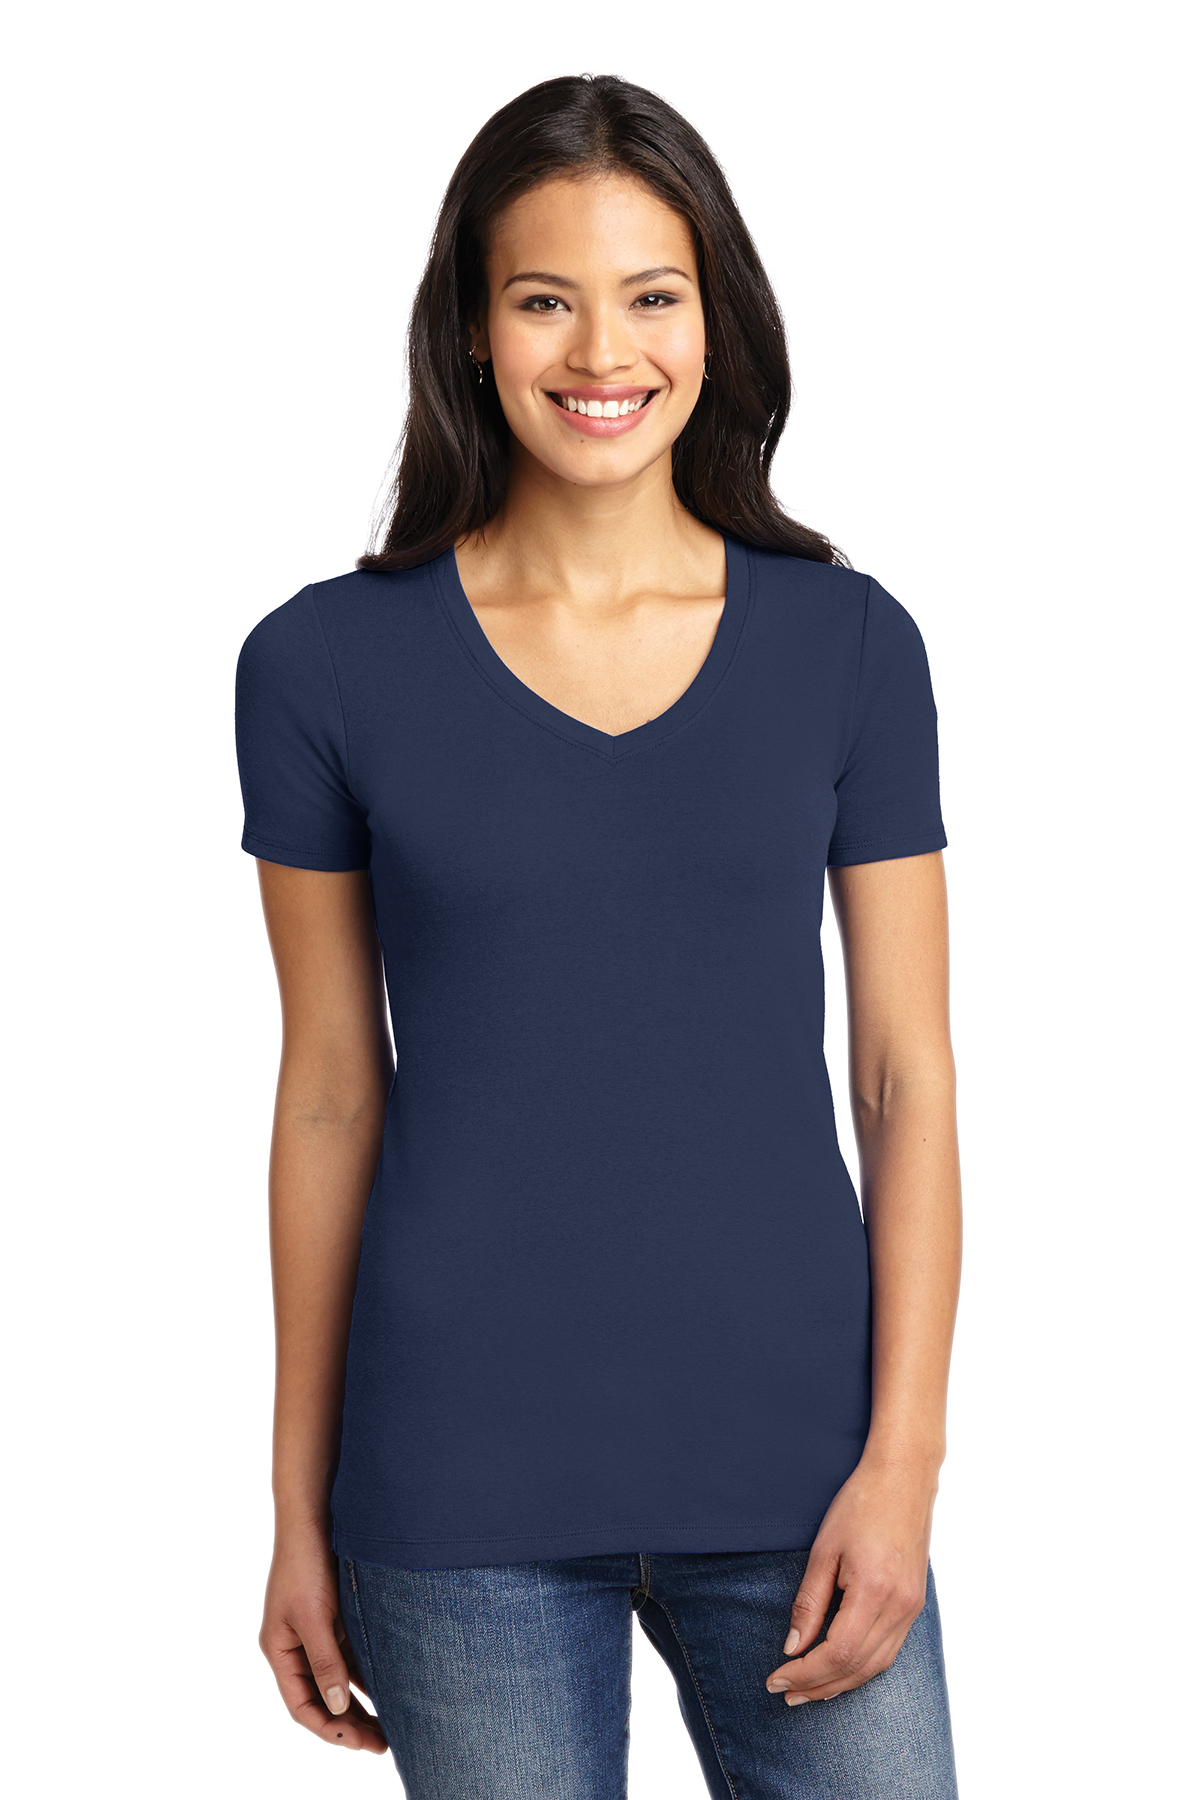 click to view Dress Blue Navy